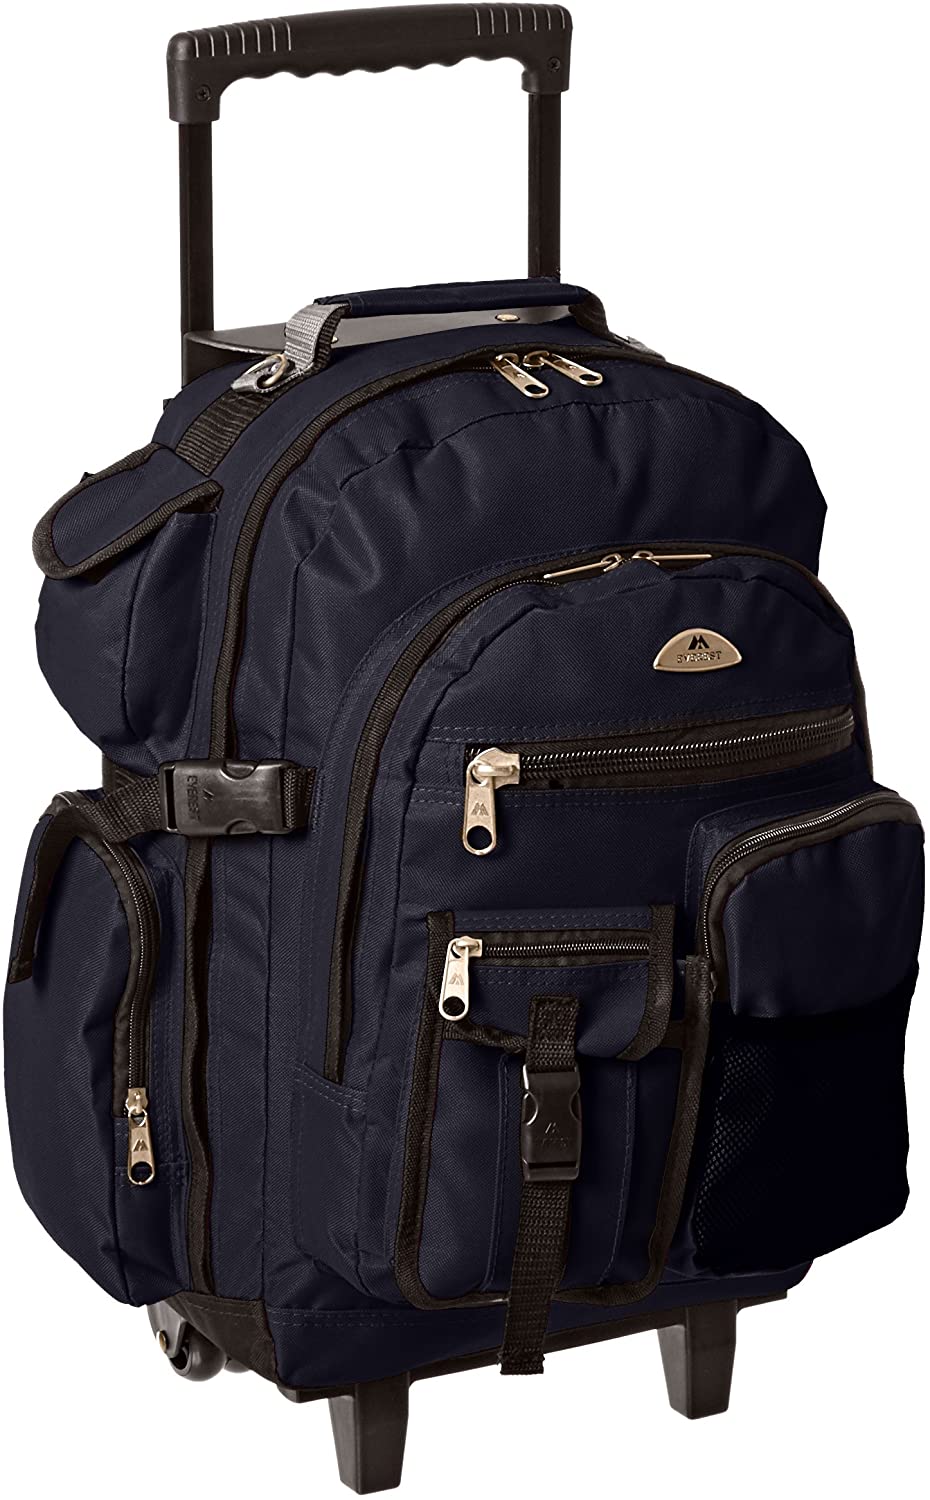 <strong>2. Everest Deluxe Wheeled Backpack</strong>